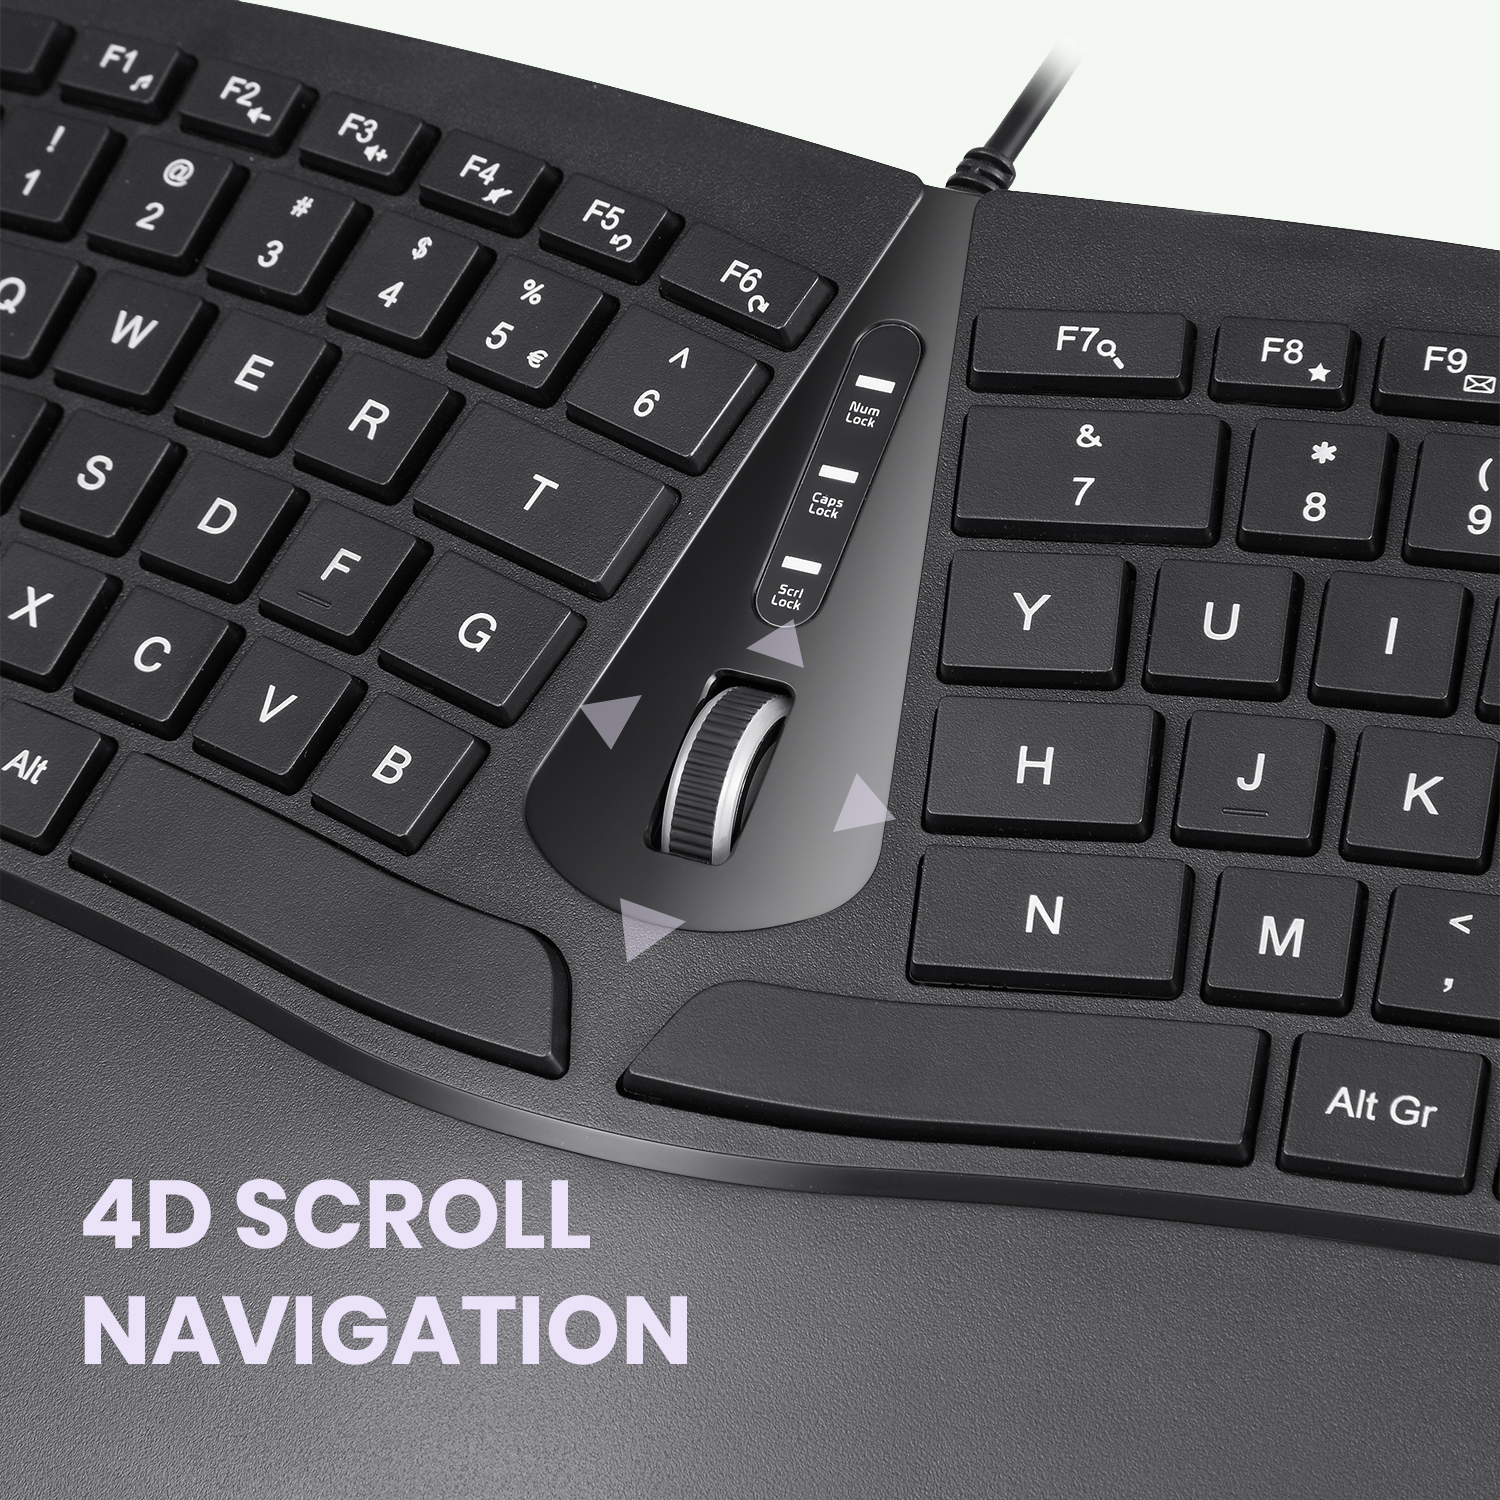 PERIBOARD-330 - Wired Backlit Ergonomic Split Keyboard with Adjustable Palm  Rest, Extra USB Ports and Scroll Wheel